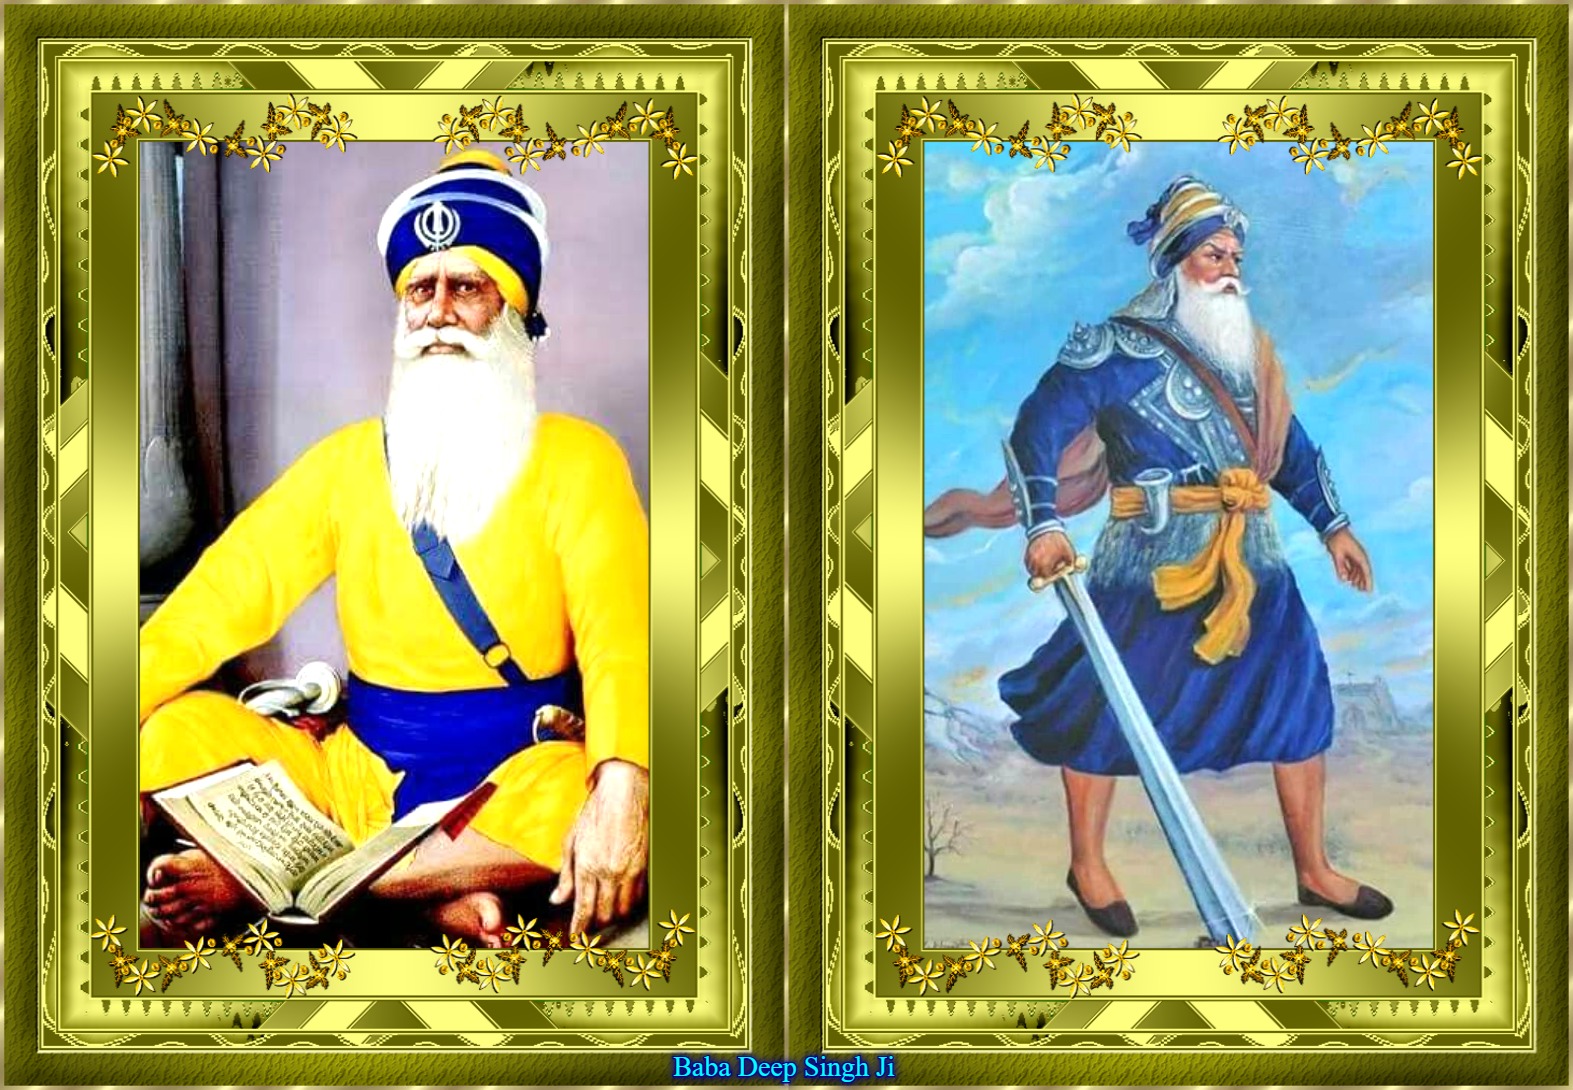 Read more about the article “Rich Tributes to General & Martyr Baba Deep Singh”